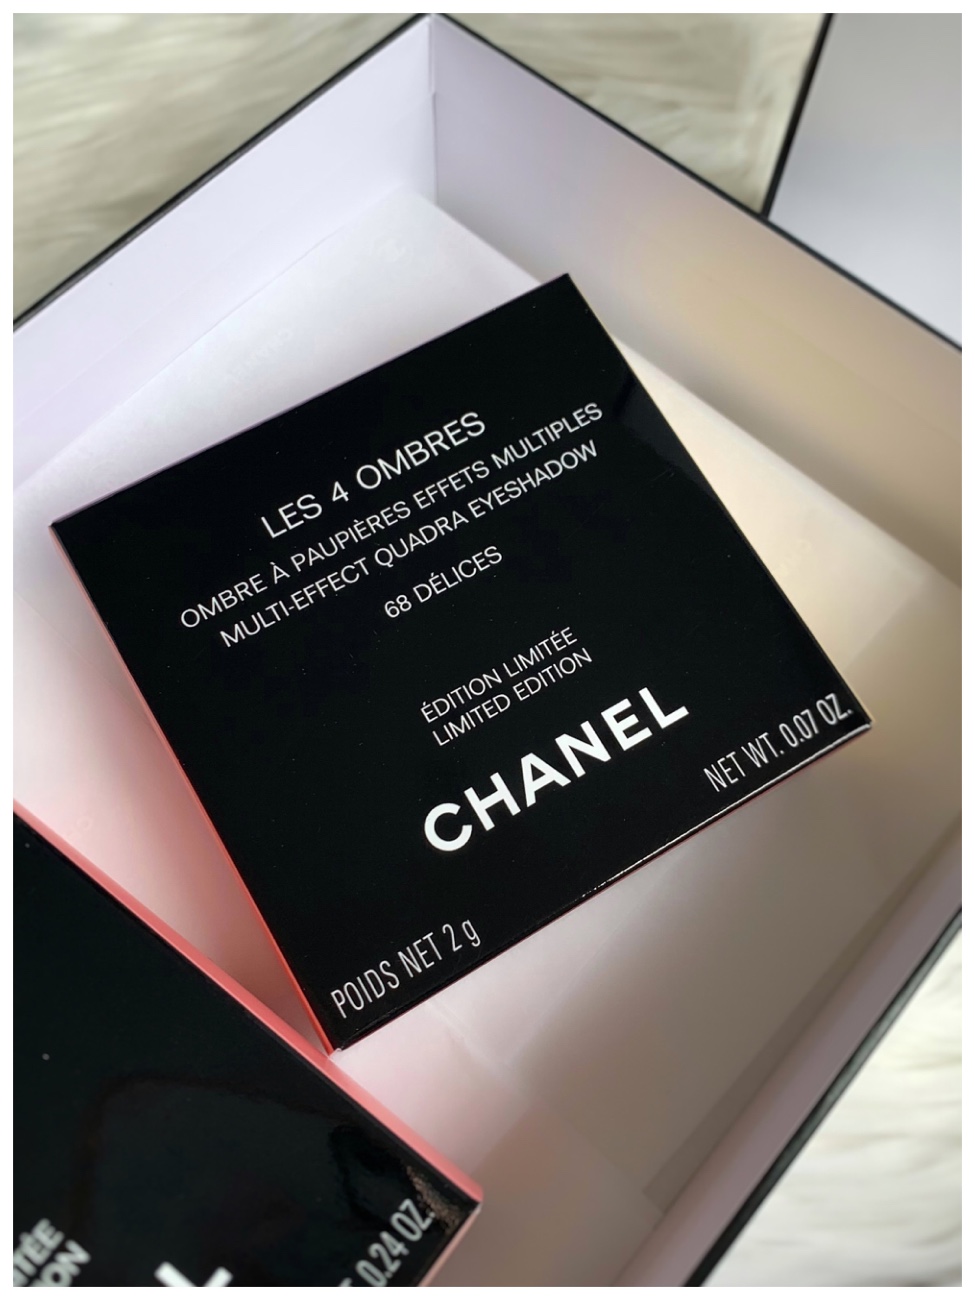 Spring 2023 CHANEL 68 Delices Les 4 Ombres Multi-Effect Quadra Eyeshadow New